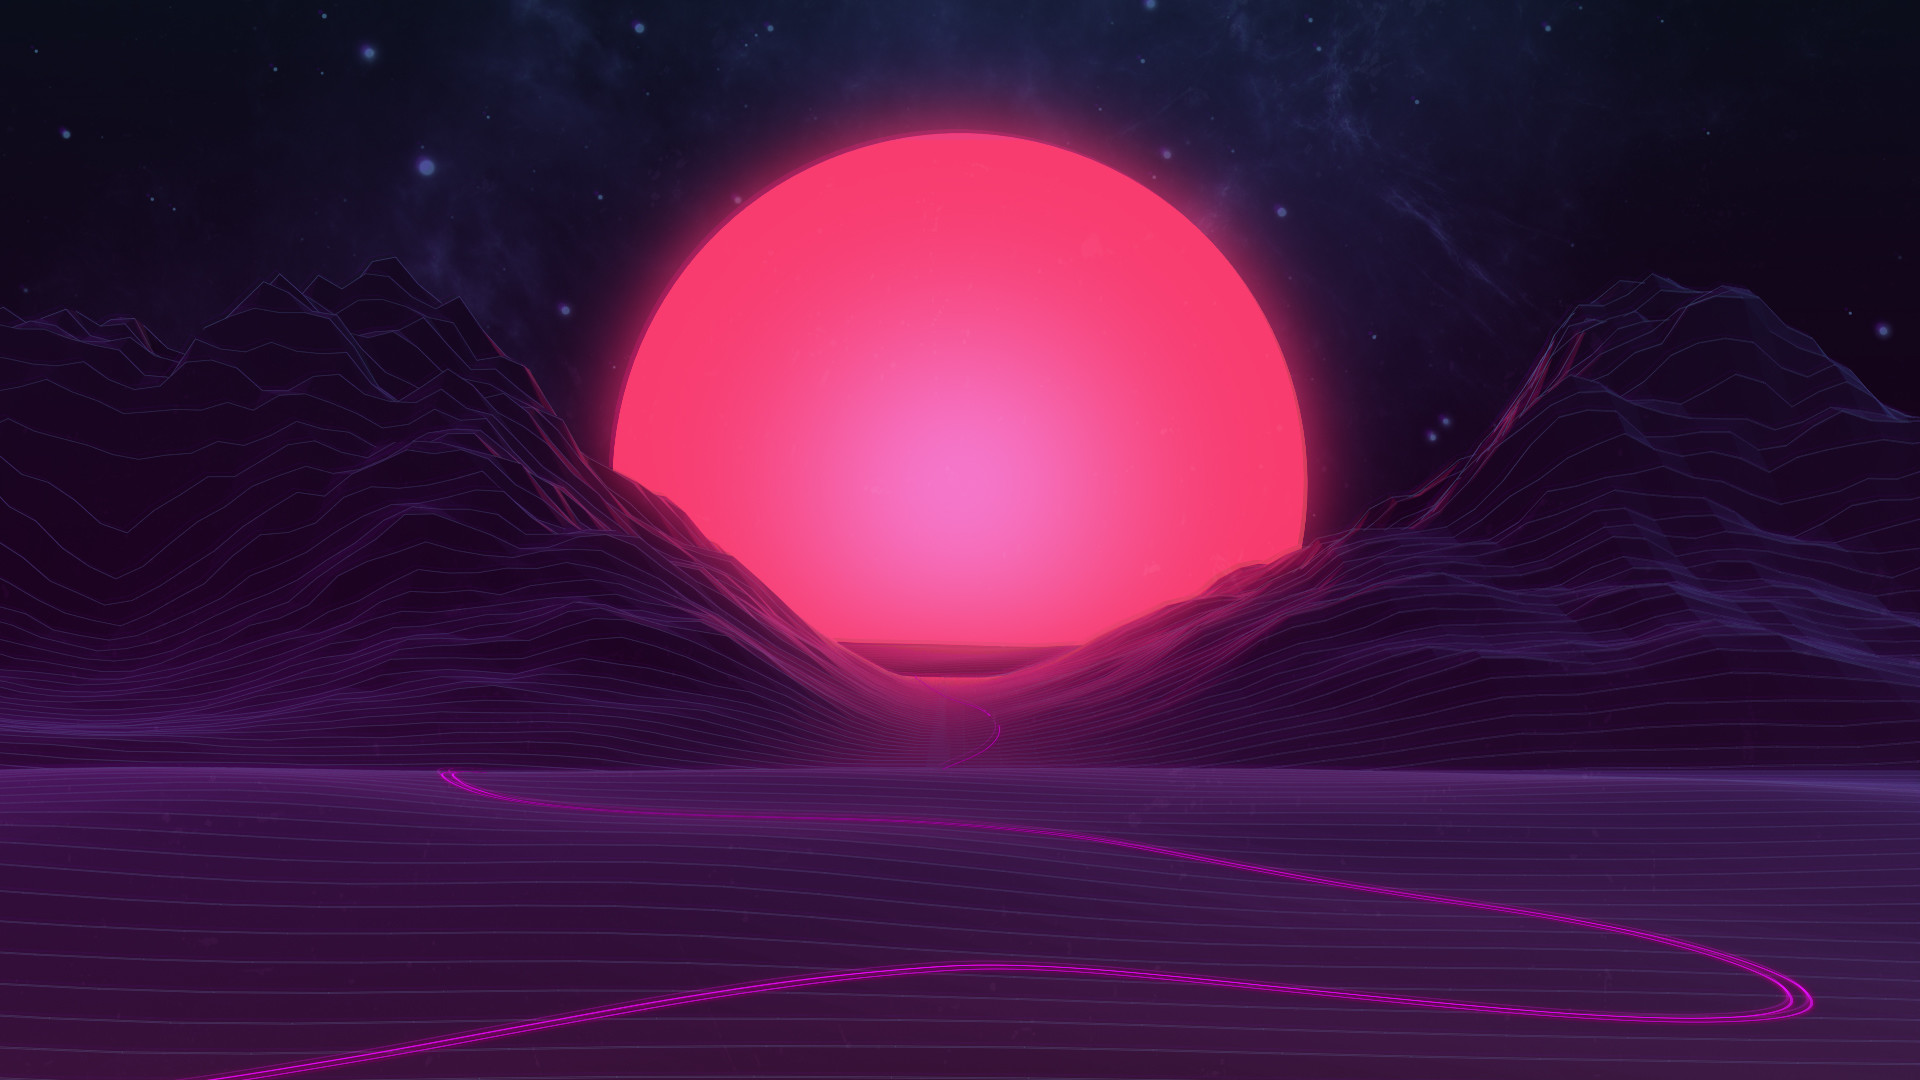 1920x1080 Neon Sunset by AxiomDesign Neon Sunset by AxiomDesign